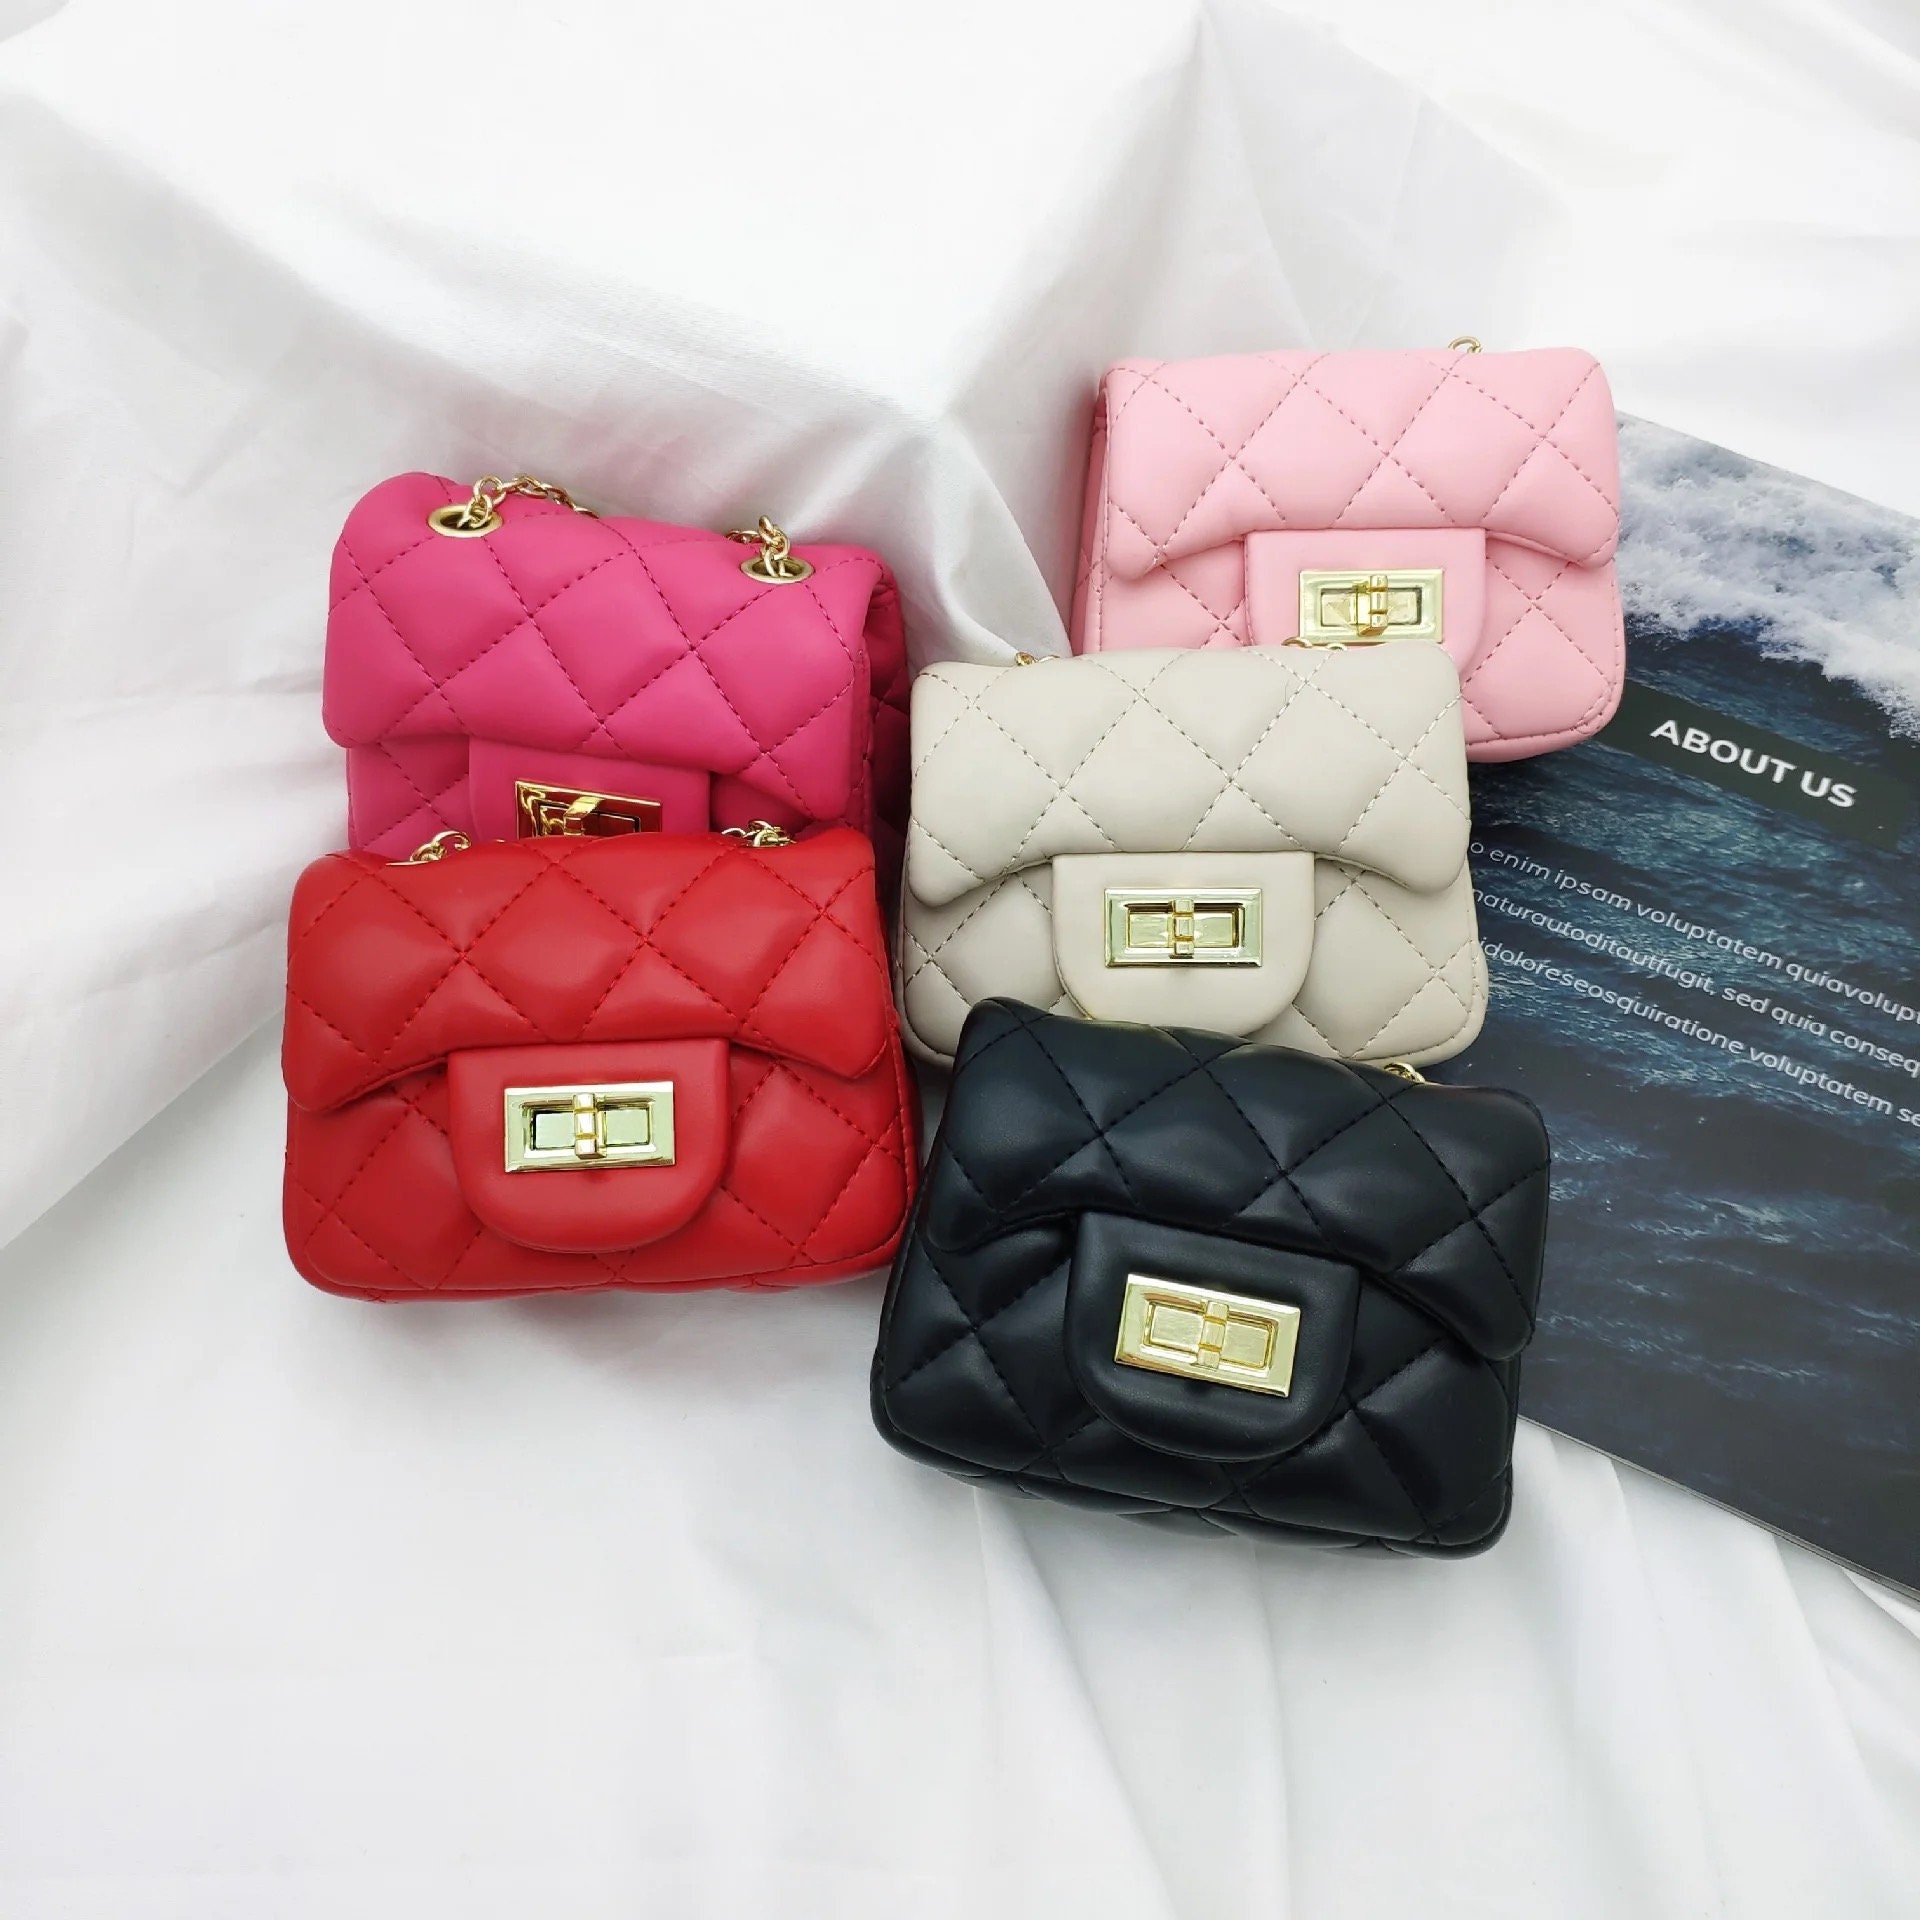 Buying a Chanel purse for a 2 year old?? - Blogs & Forums